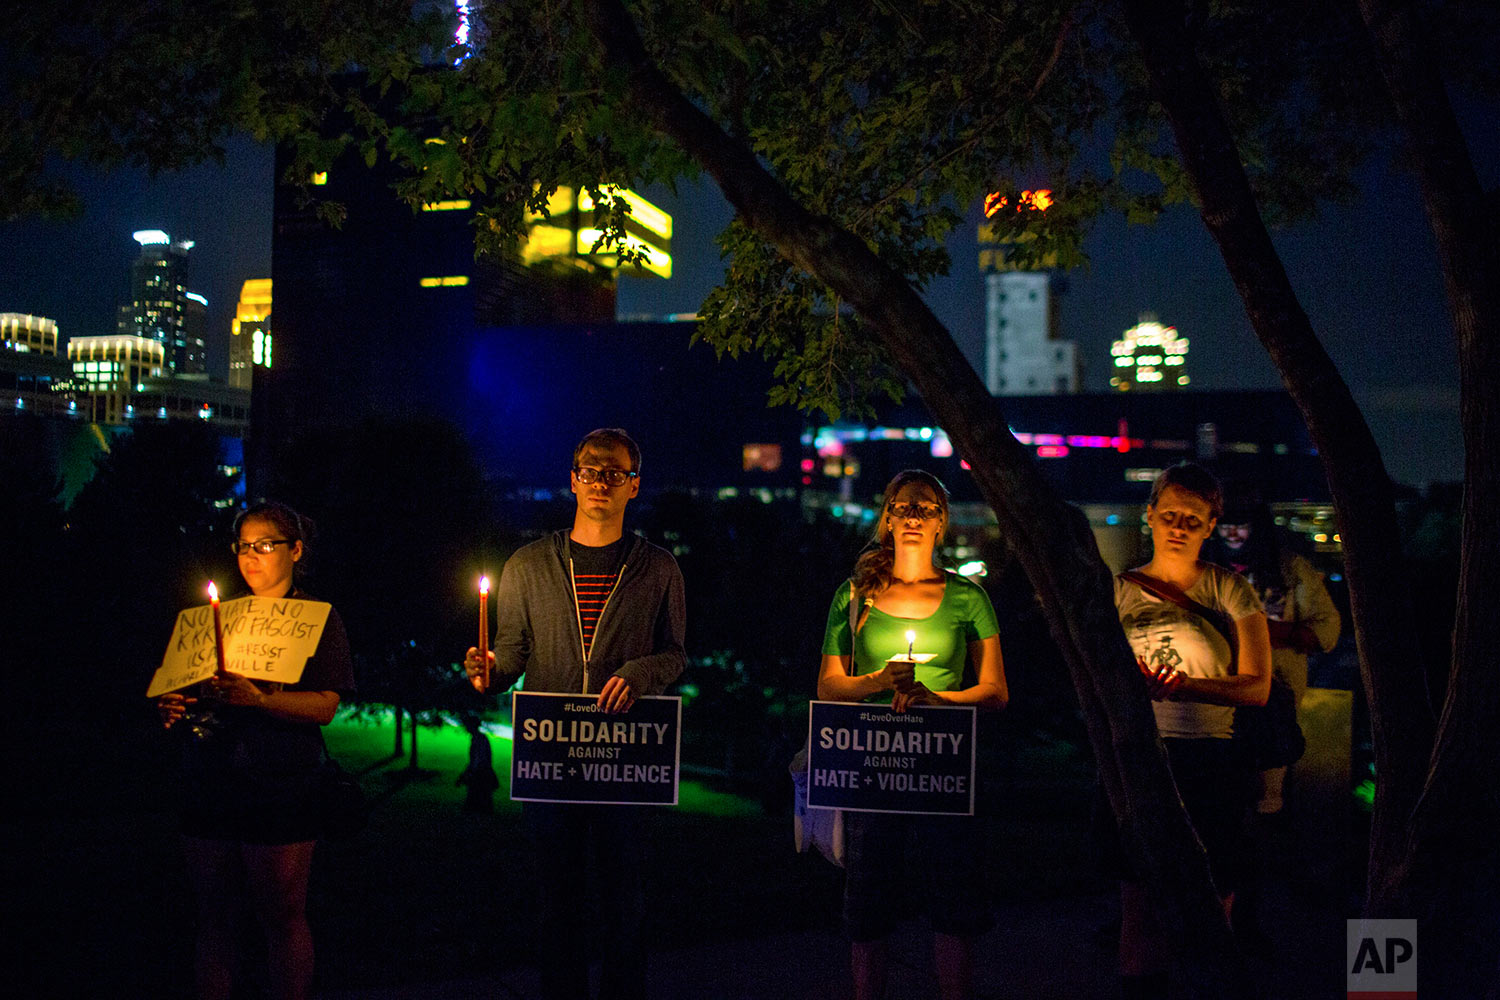  People stand atop a hill for a candlelight vigil in solidarity with Charlottesville, Virginia, counter-protesters at Gold Medal Park in Minneapolis on Saturday night, Aug. 12, 2017. (Courtney Pedroza/Star Tribune via AP) 